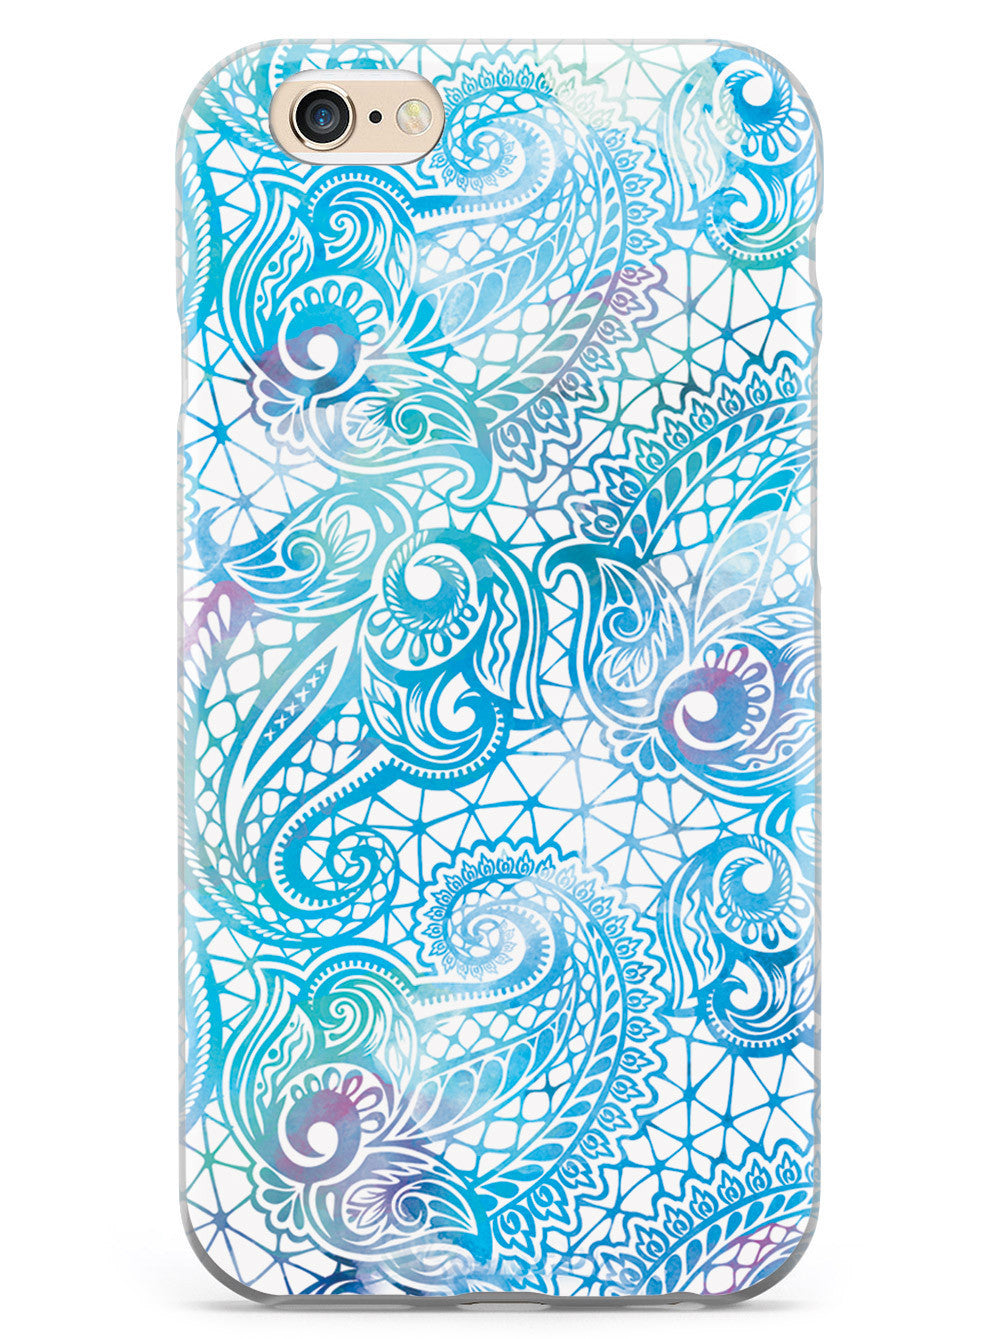 Teal Paisley Lace Case